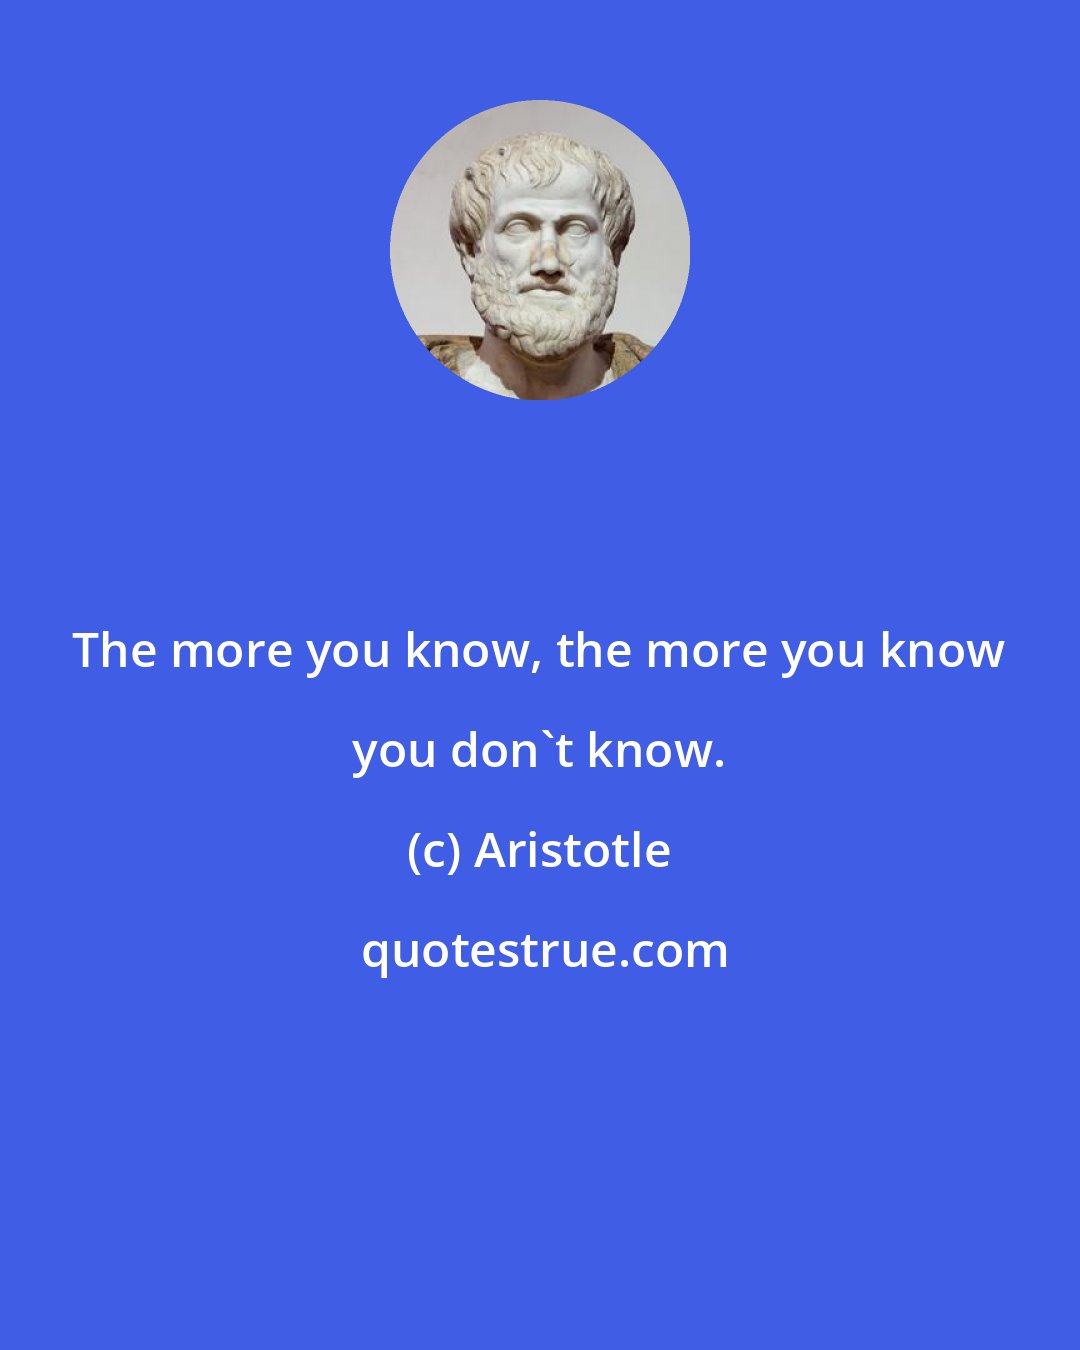 Aristotle: The more you know, the more you know you don't know.